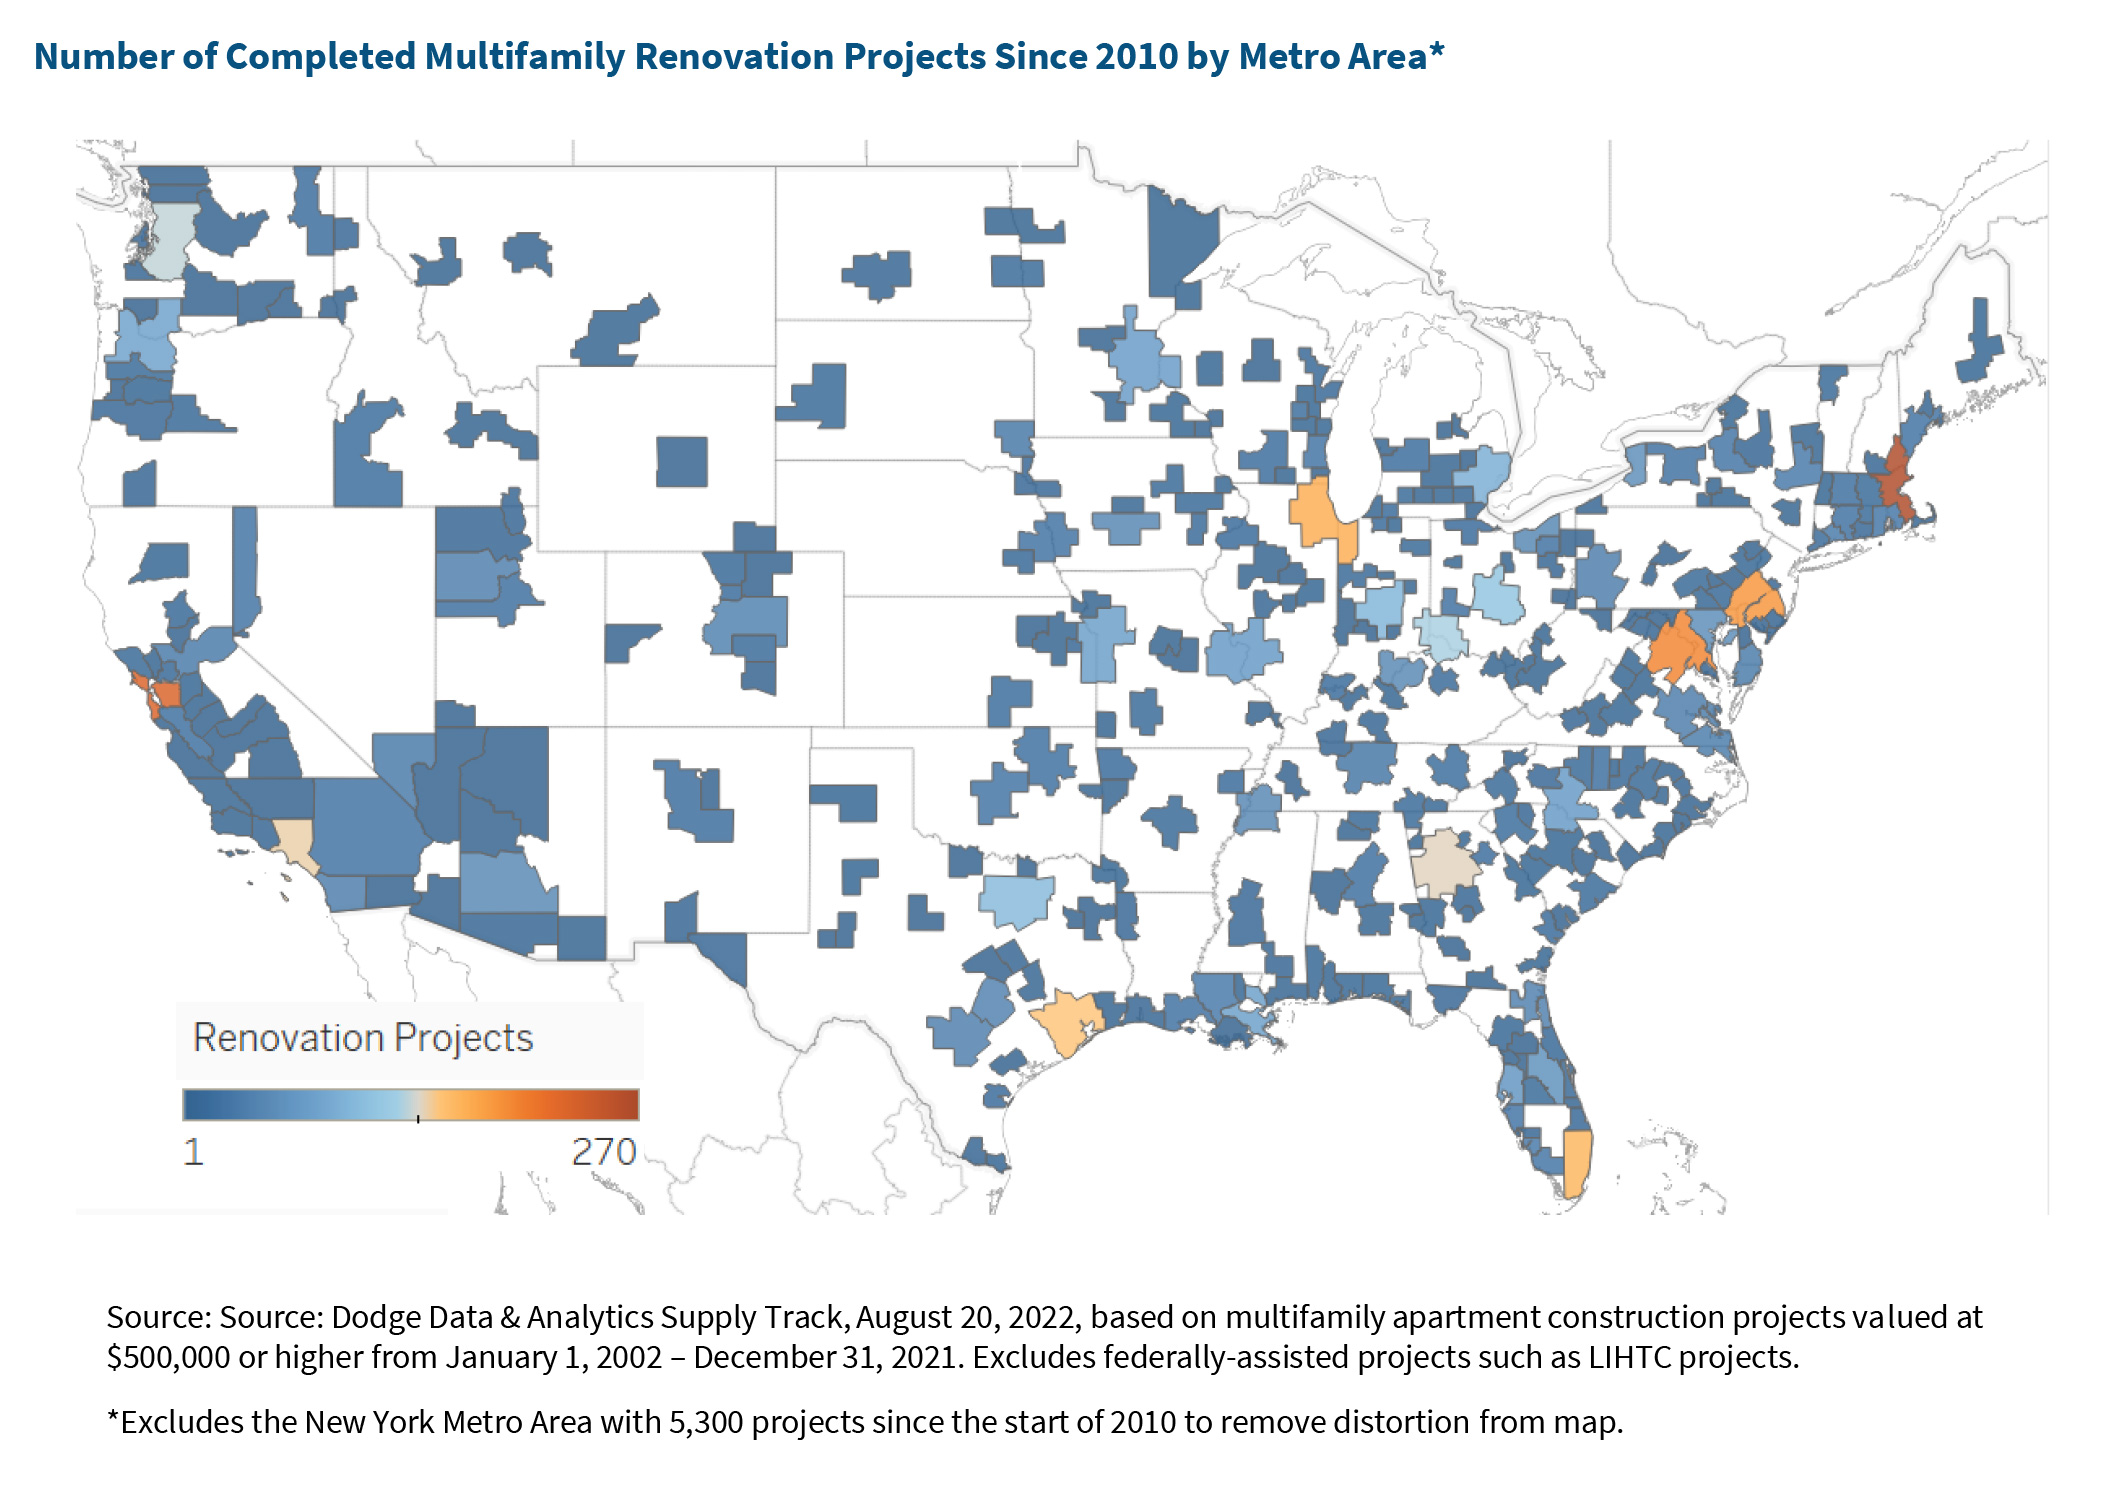 Number of Completed Multifamily Renovation Projects Since 2010 by Metro Area